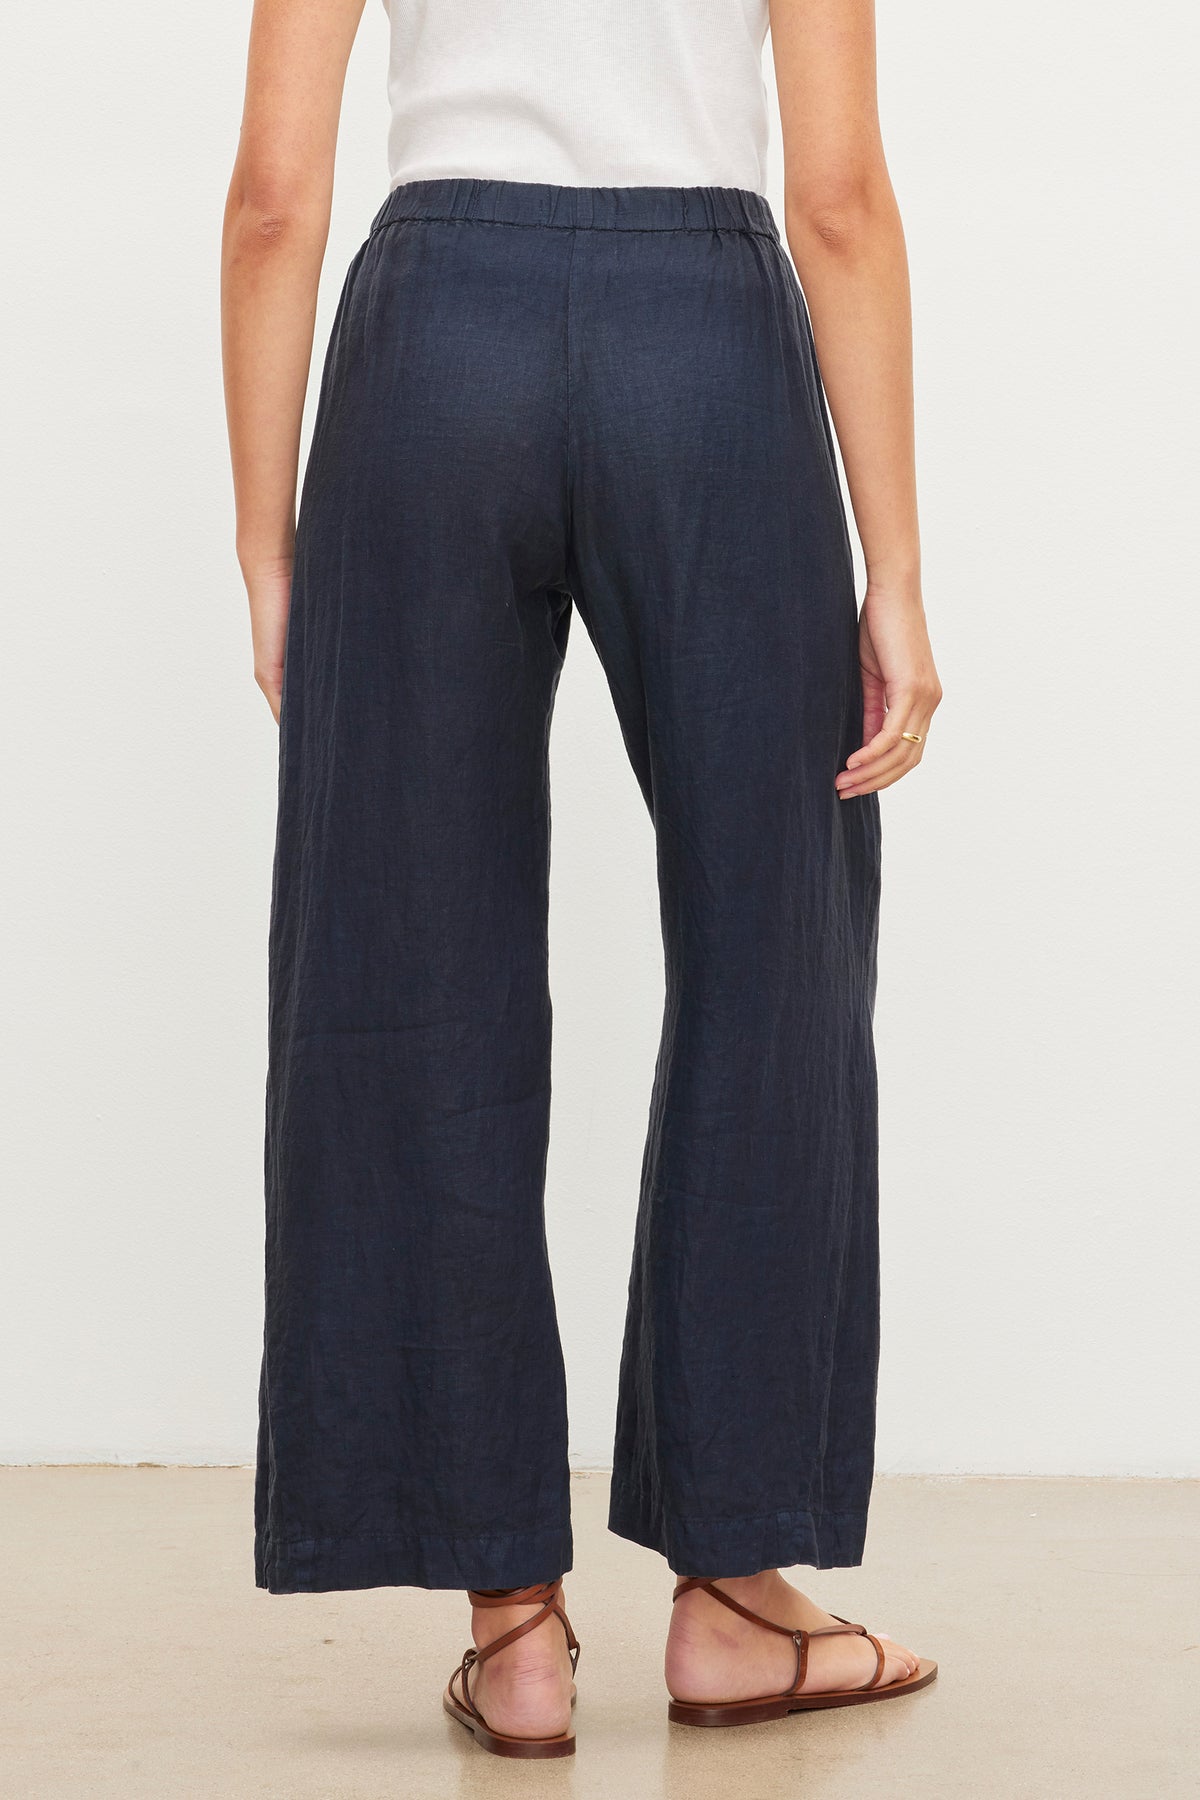 Woman standing, viewed from behind, wearing Loose Navy Blue LOLA LINEN PANT with an elastic waist and brown sandals by Velvet by Graham & Spencer.-36581077549249